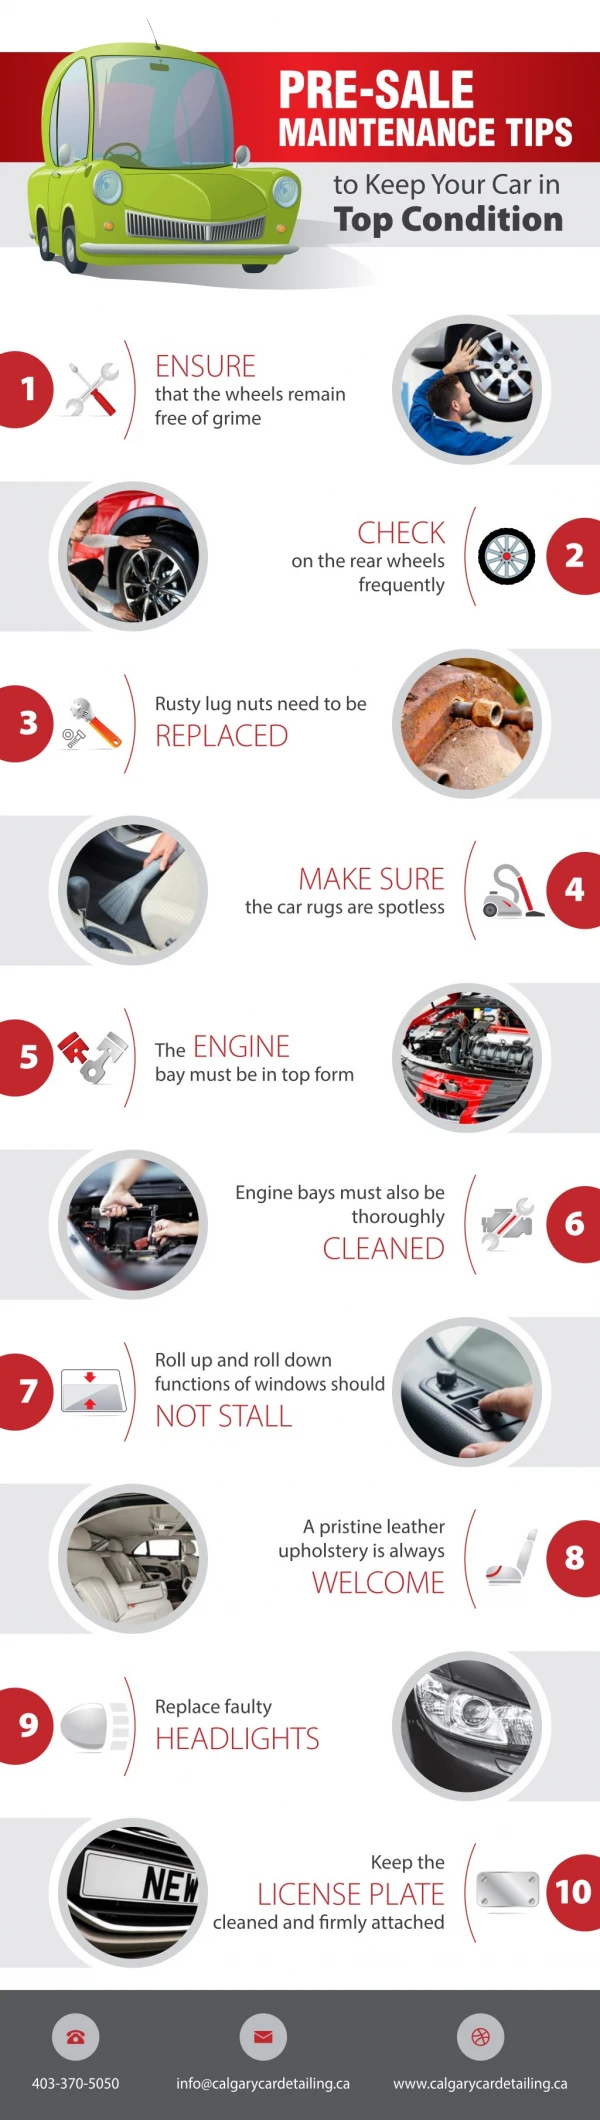 Pre-Sale Maintenance Tips to Keep Your Car in Top Condition